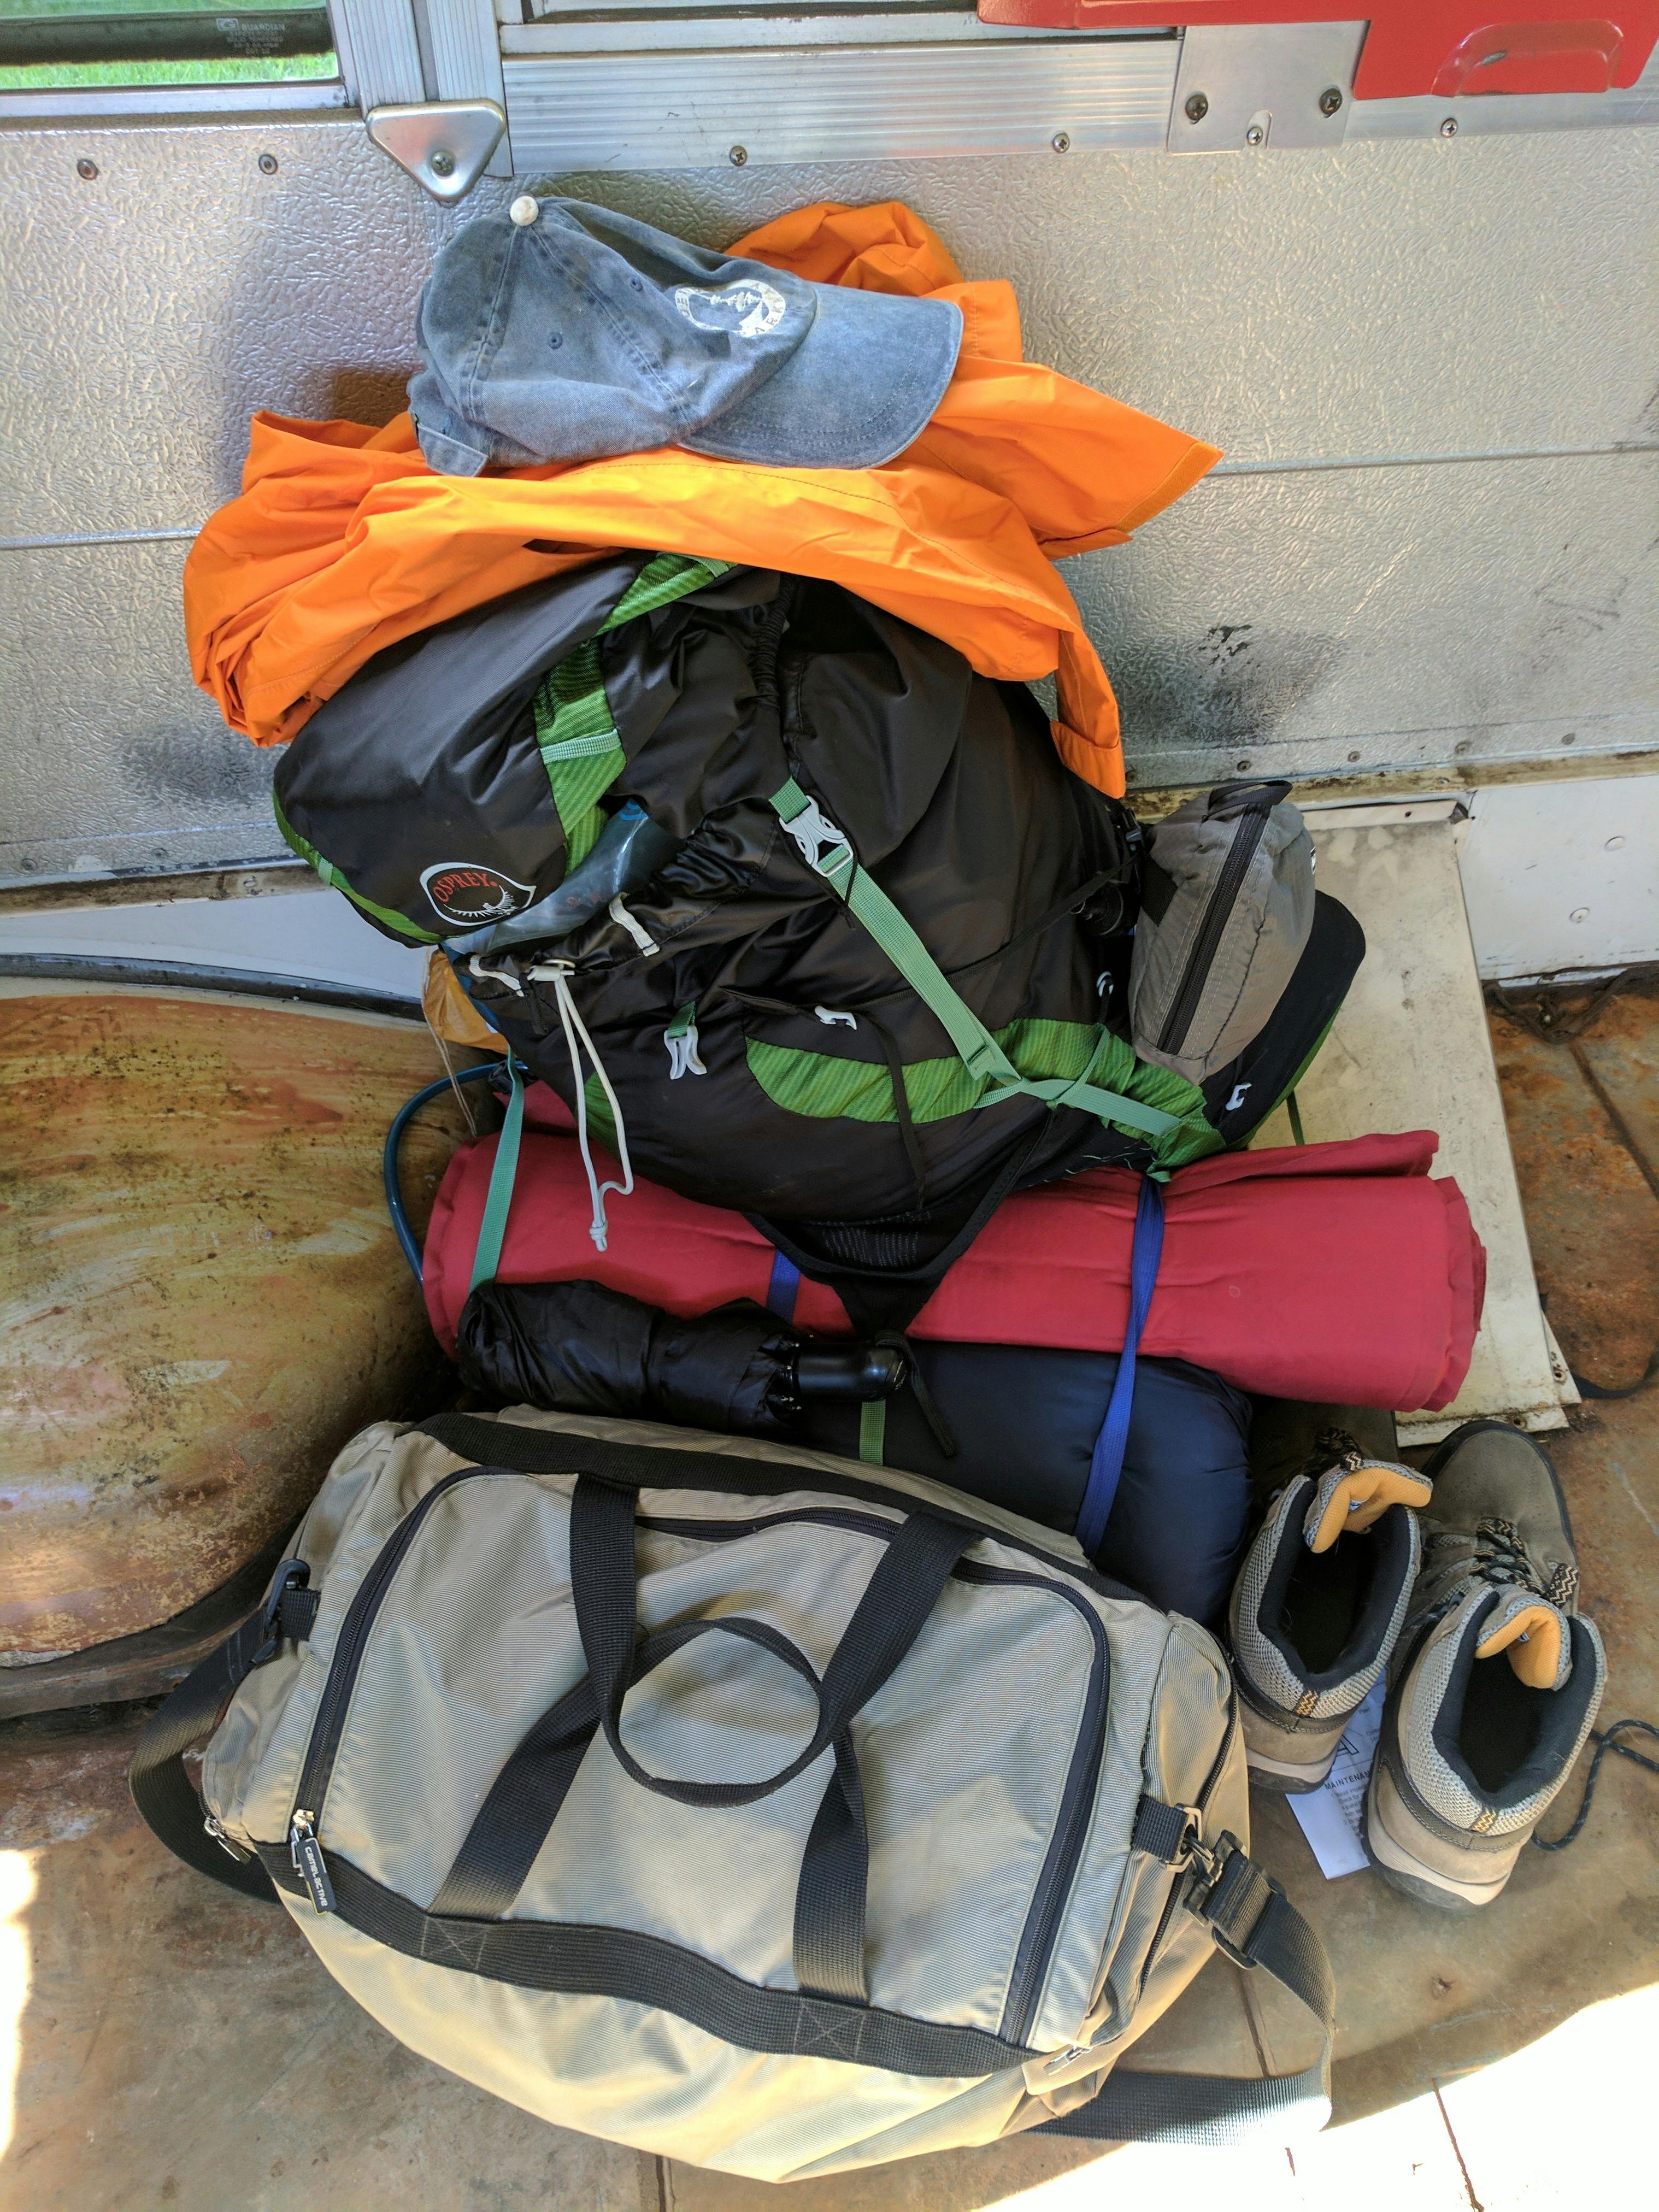 A backpack, some hiking shoes, a hat, and some other gear in a pile.